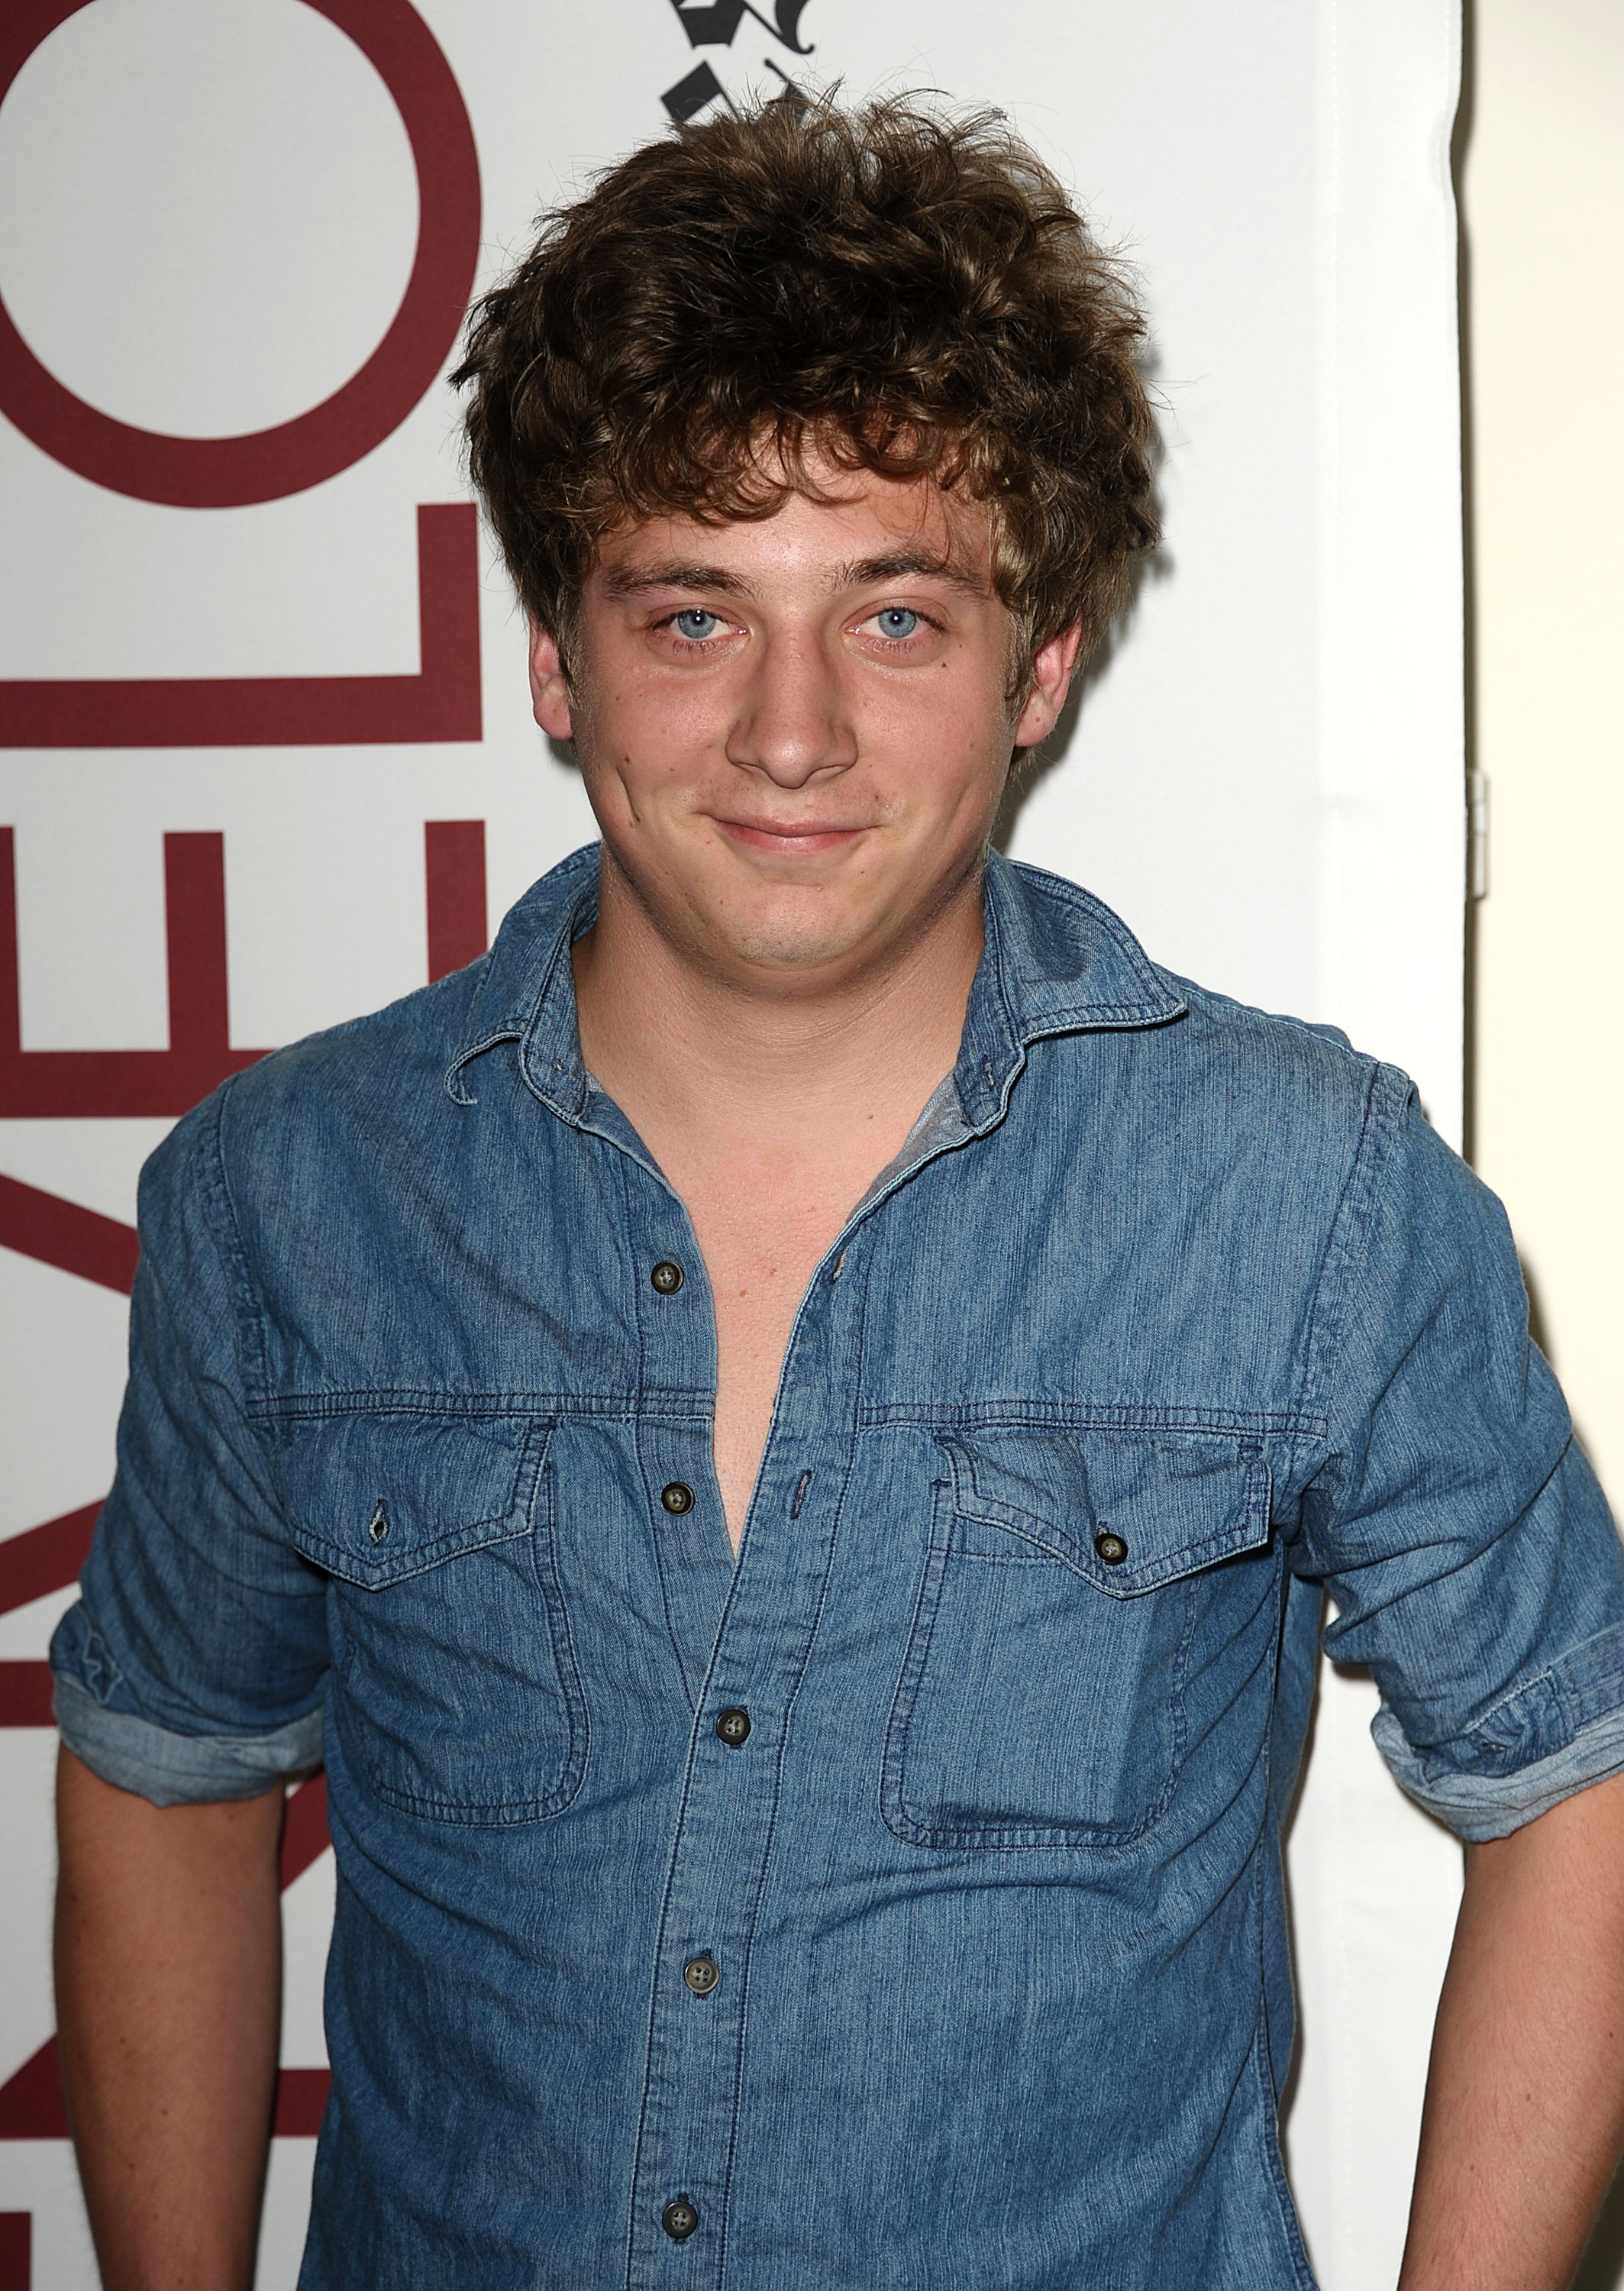 Jeremy Allen White at the "Shameless" screening on June 2, 2011 in Los Angeles, California. | Source: Getty Images